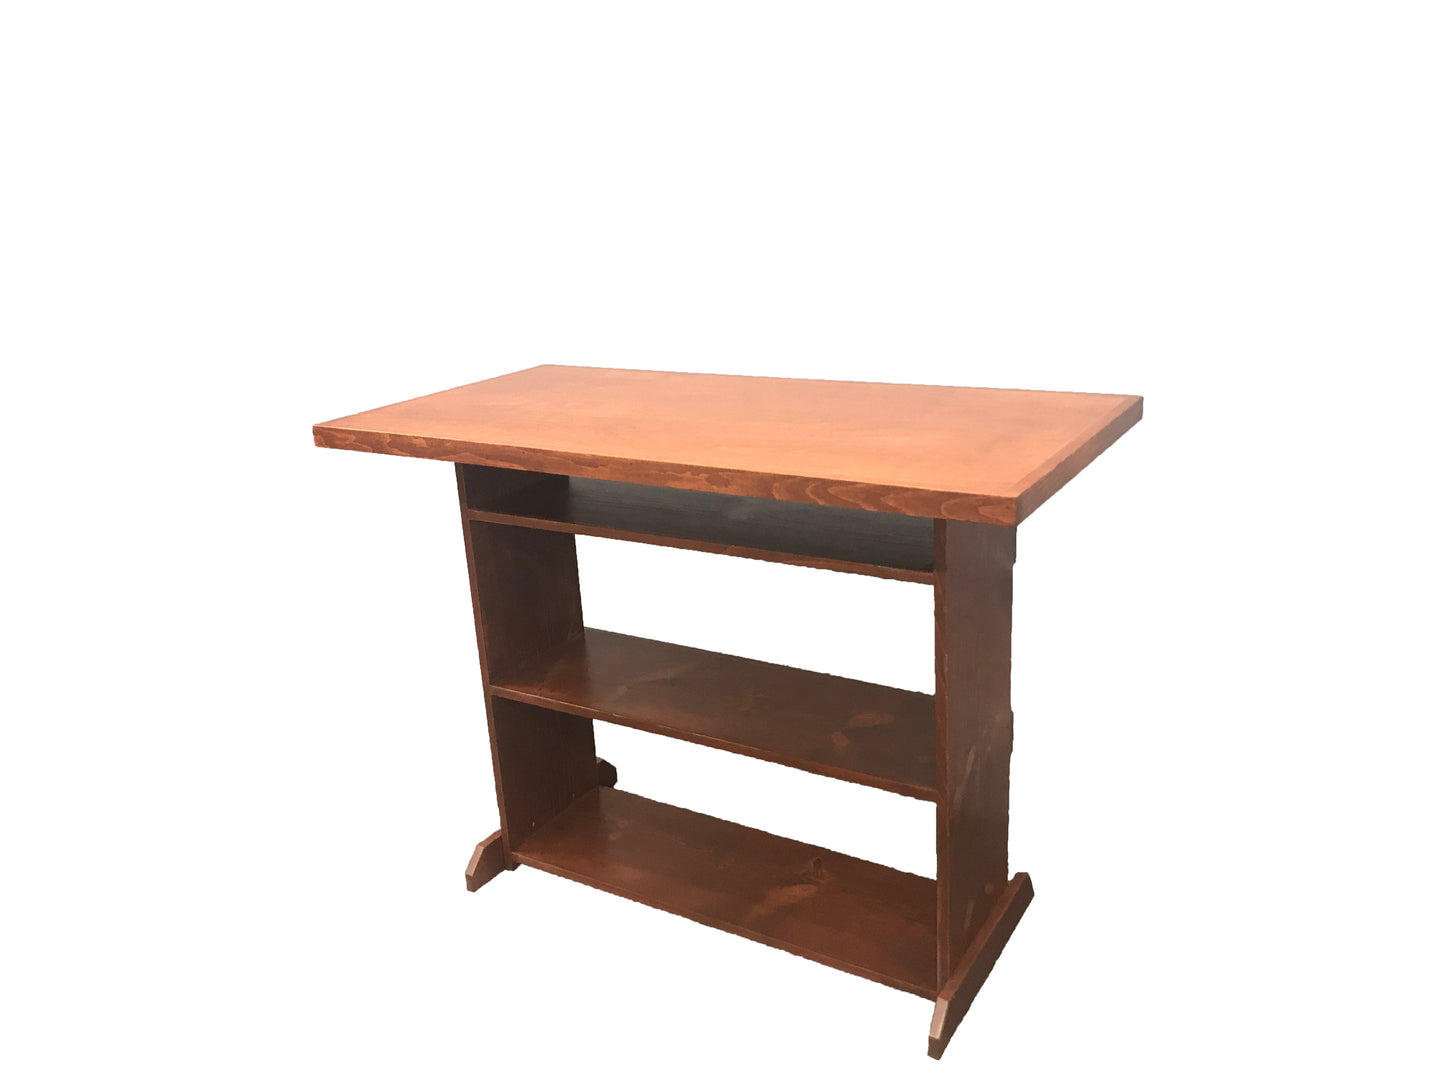 Evergreen Pub Table is constructed from pine and birch and is pictured in Toffee finish.